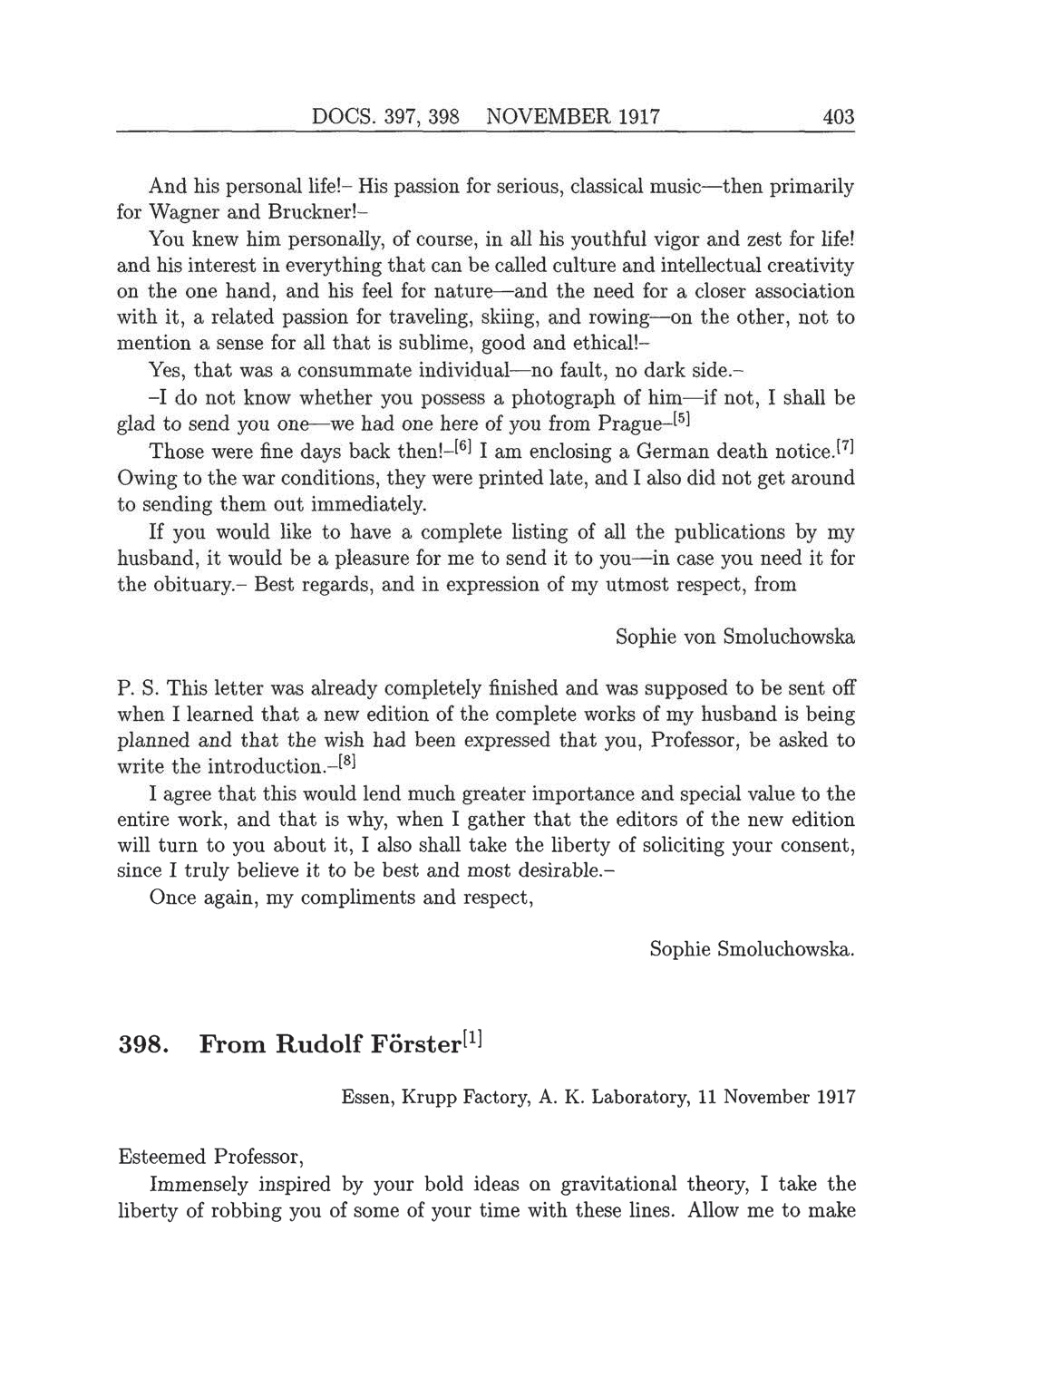 Volume 8: The Berlin Years: Correspondence, 1914-1918 (English translation supplement) page 403